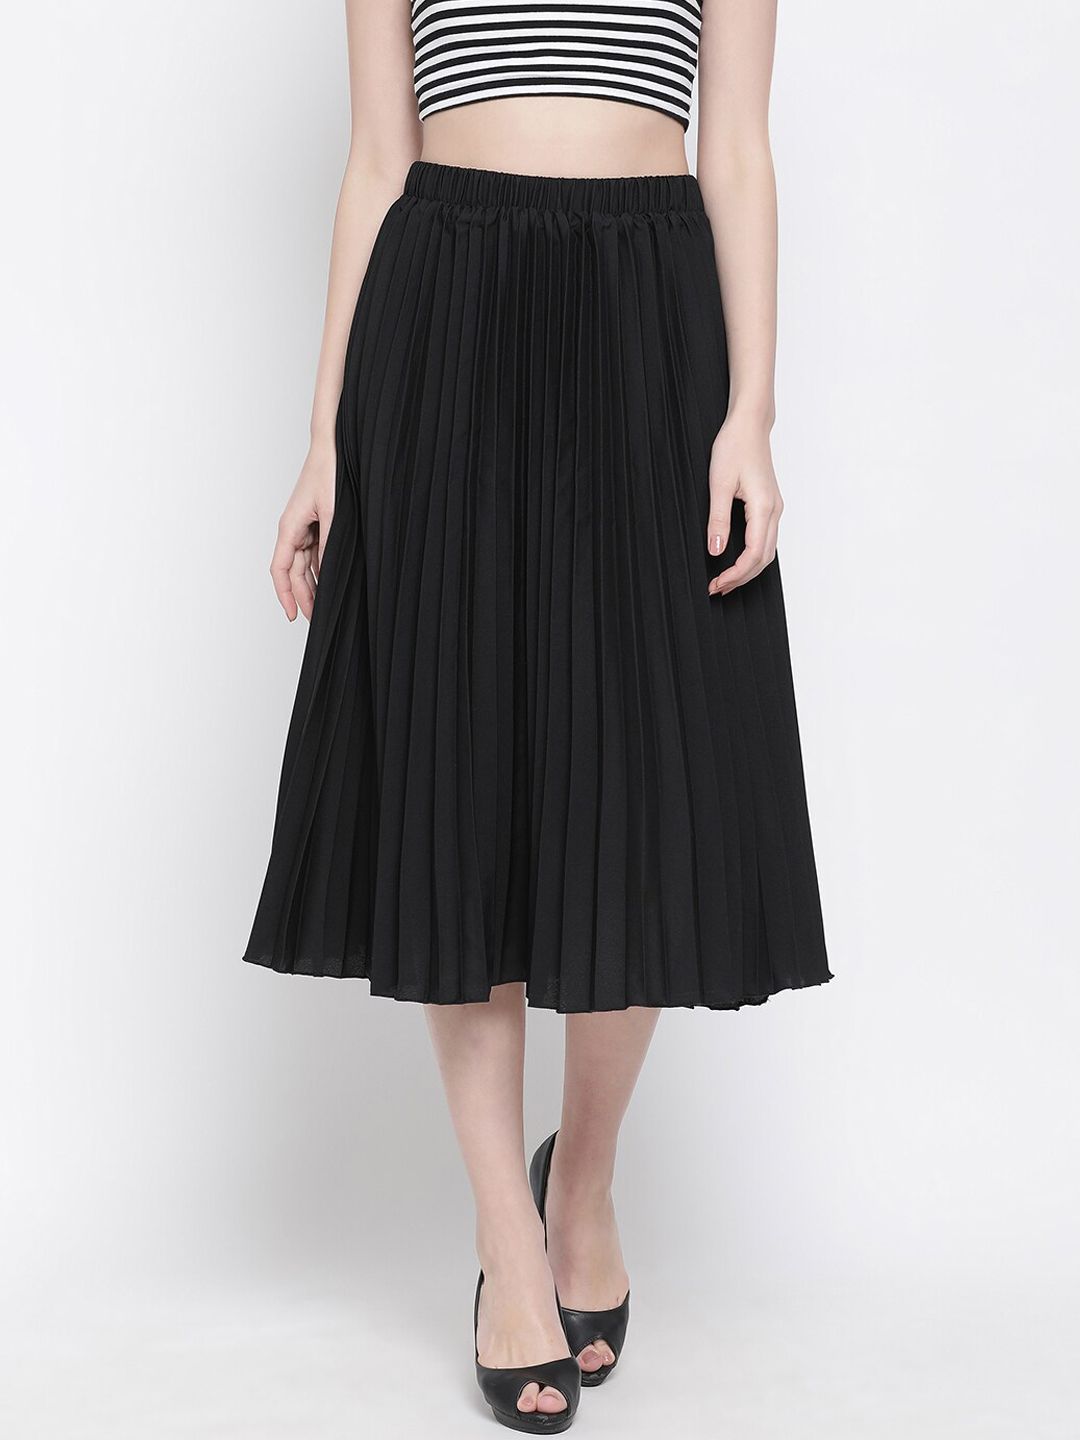 Oxolloxo Black Accordion Pleated A-Line Midi Skirt Price in India